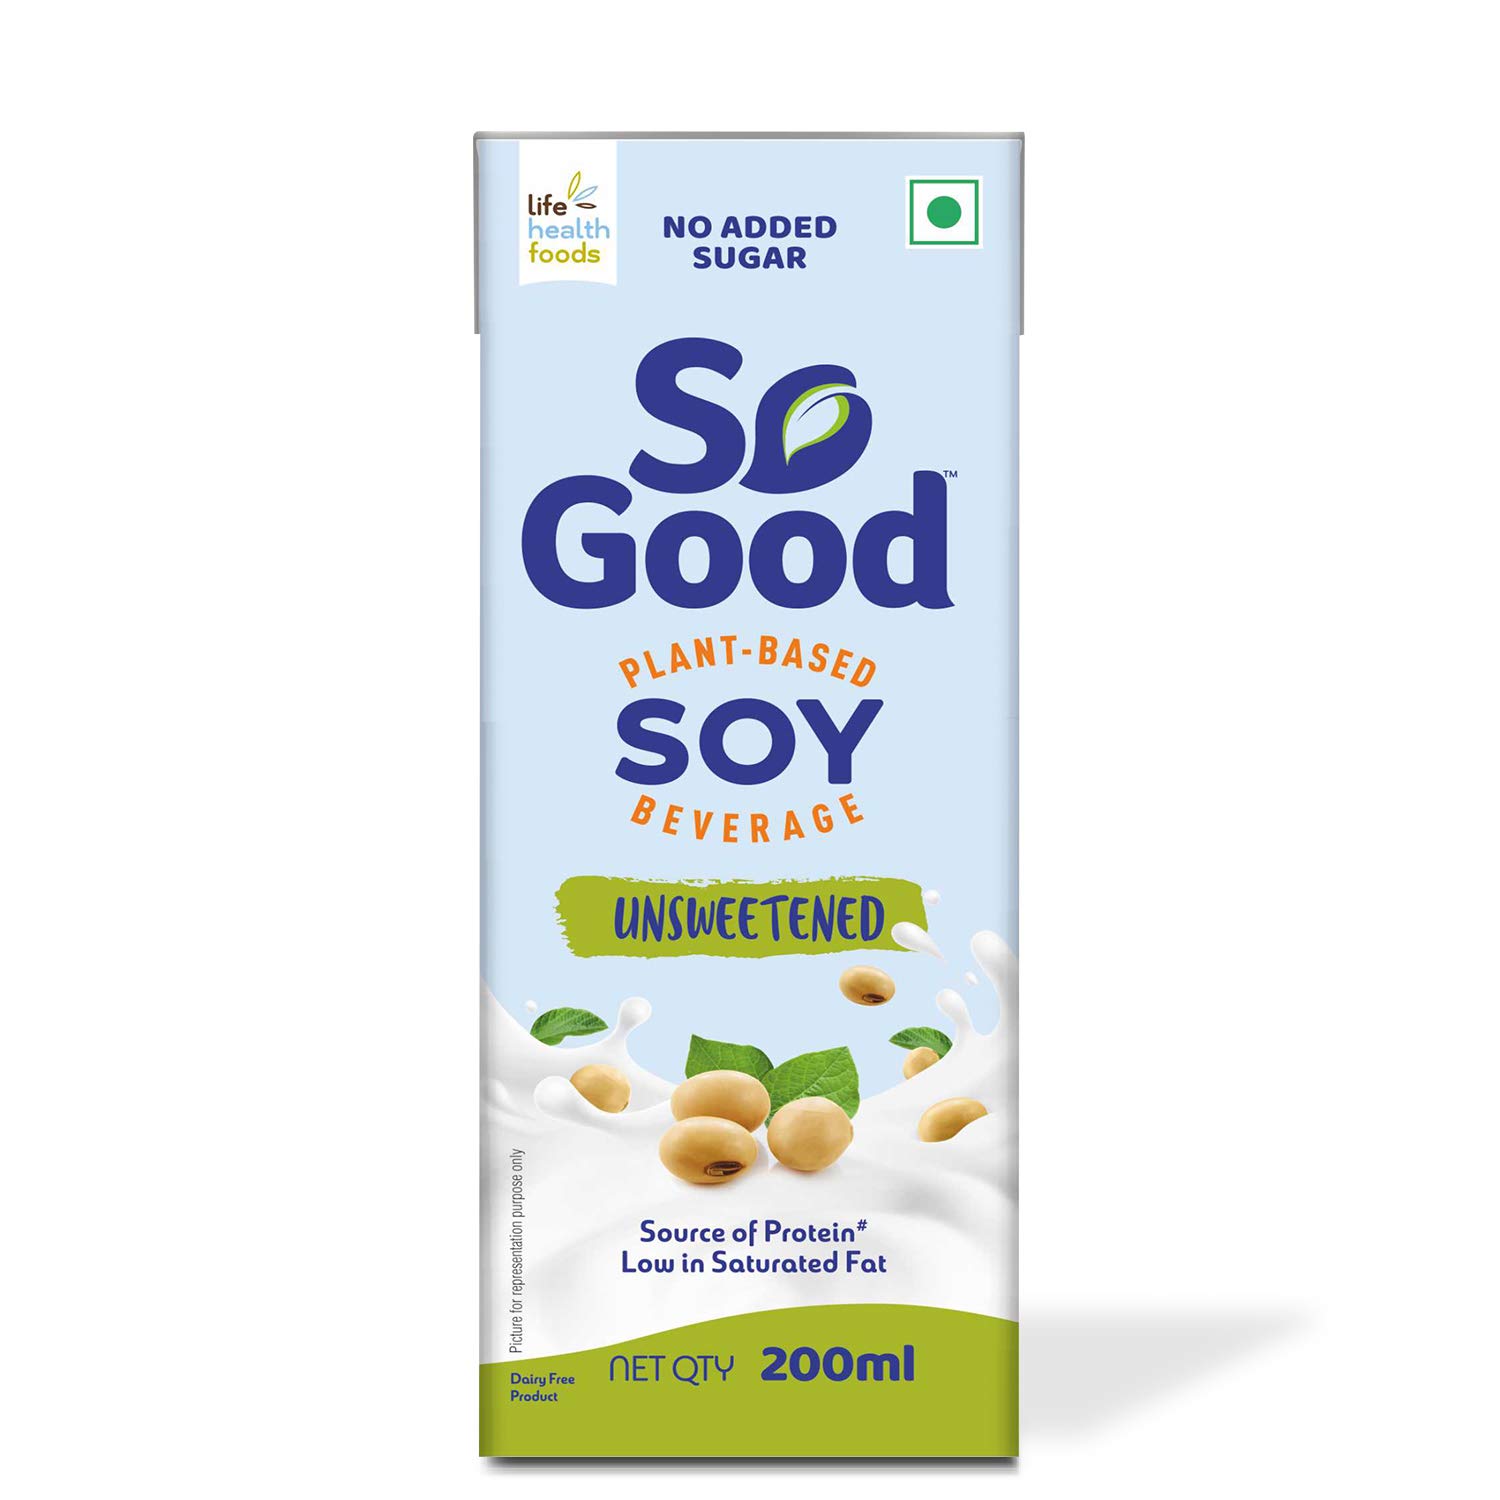 So Good Soy Beverage Unsweetened 200 ml Image